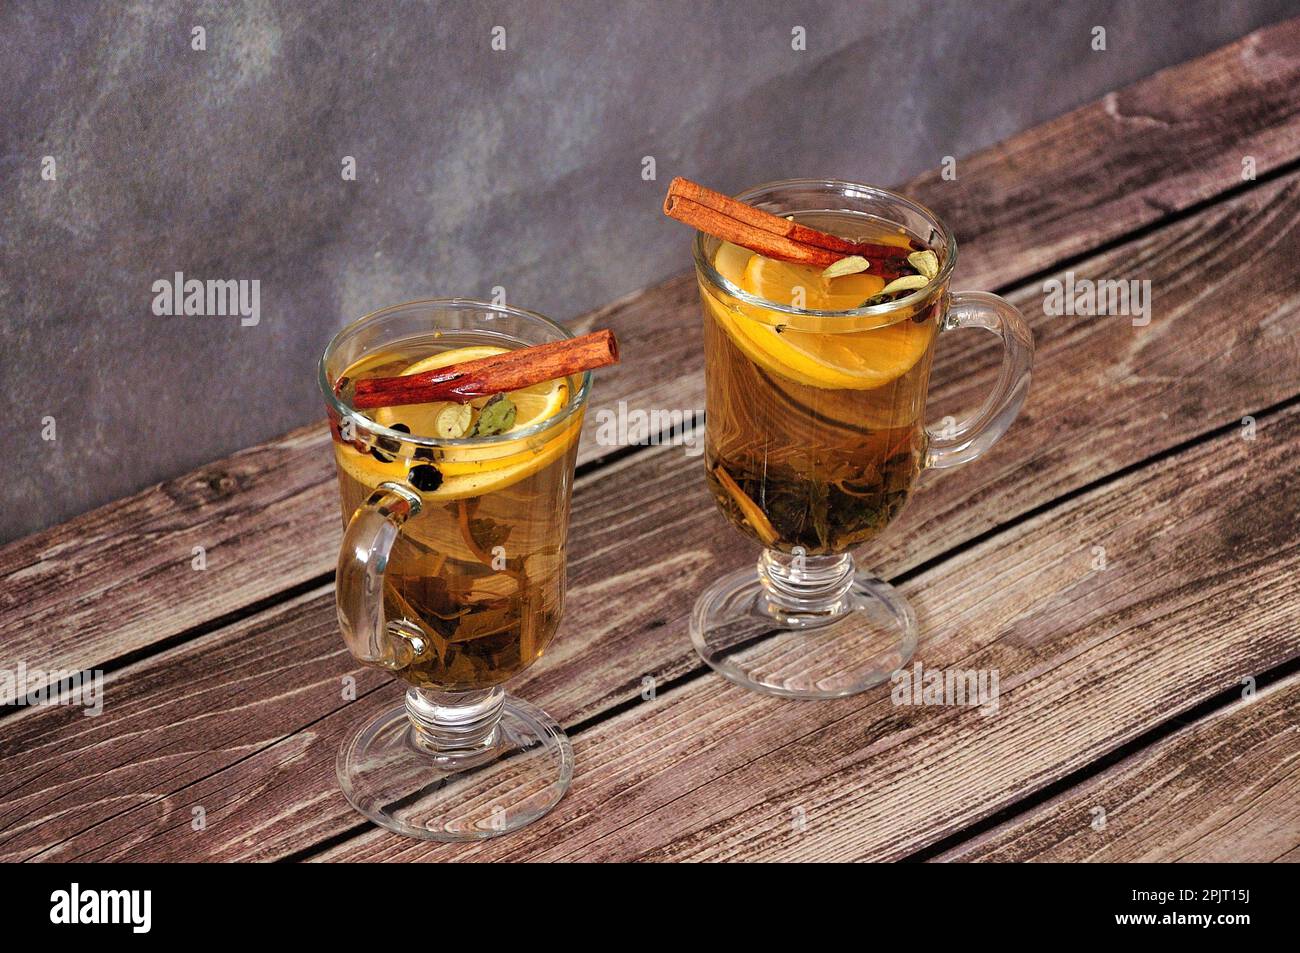 Two glasses with herbal tea, lemon slice and cinnamon sticks on a wooden table. Close-up. Stock Photo